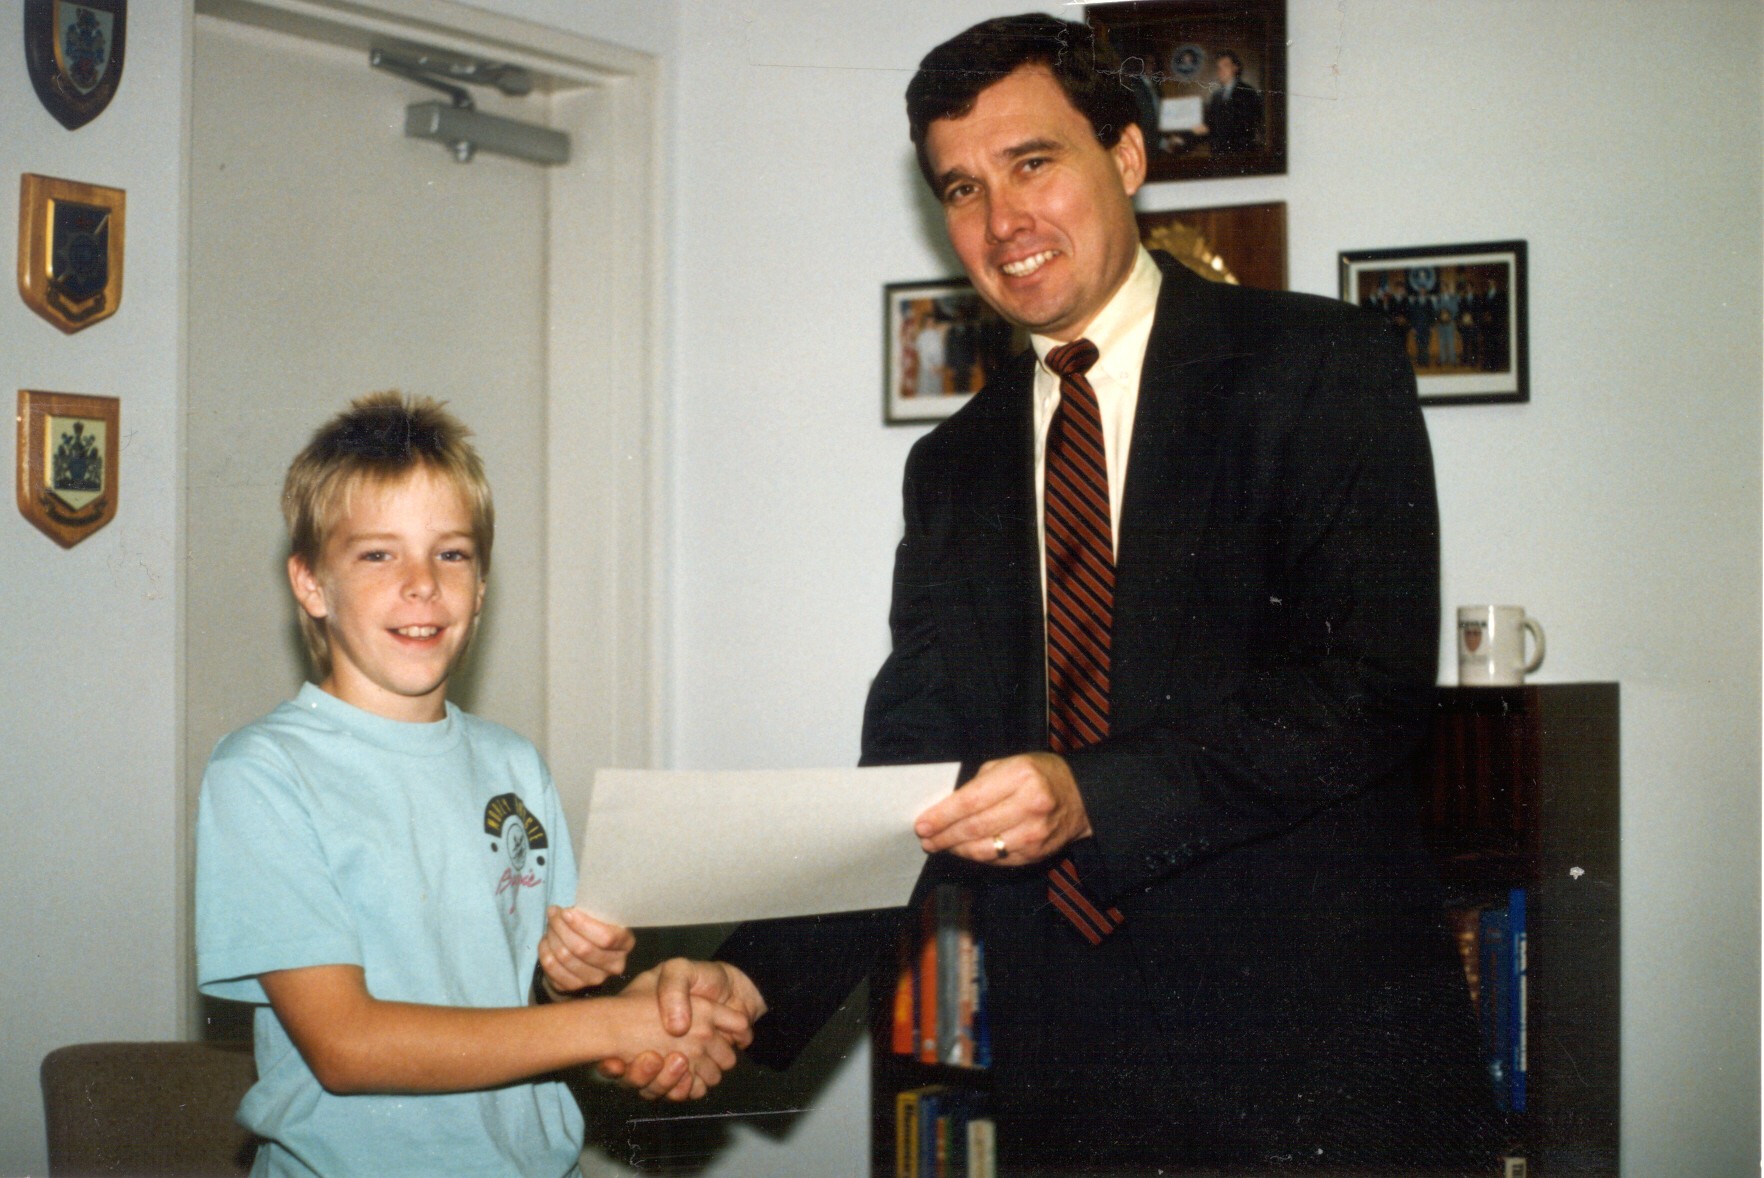 Port St. Lucie, Florida, Police Chief R. Gil Kerlikowske presents a certificate to the youngster chosen as "Police Chief for a Day" in 1988. Photo courtesy Port St. Lucie Police Department